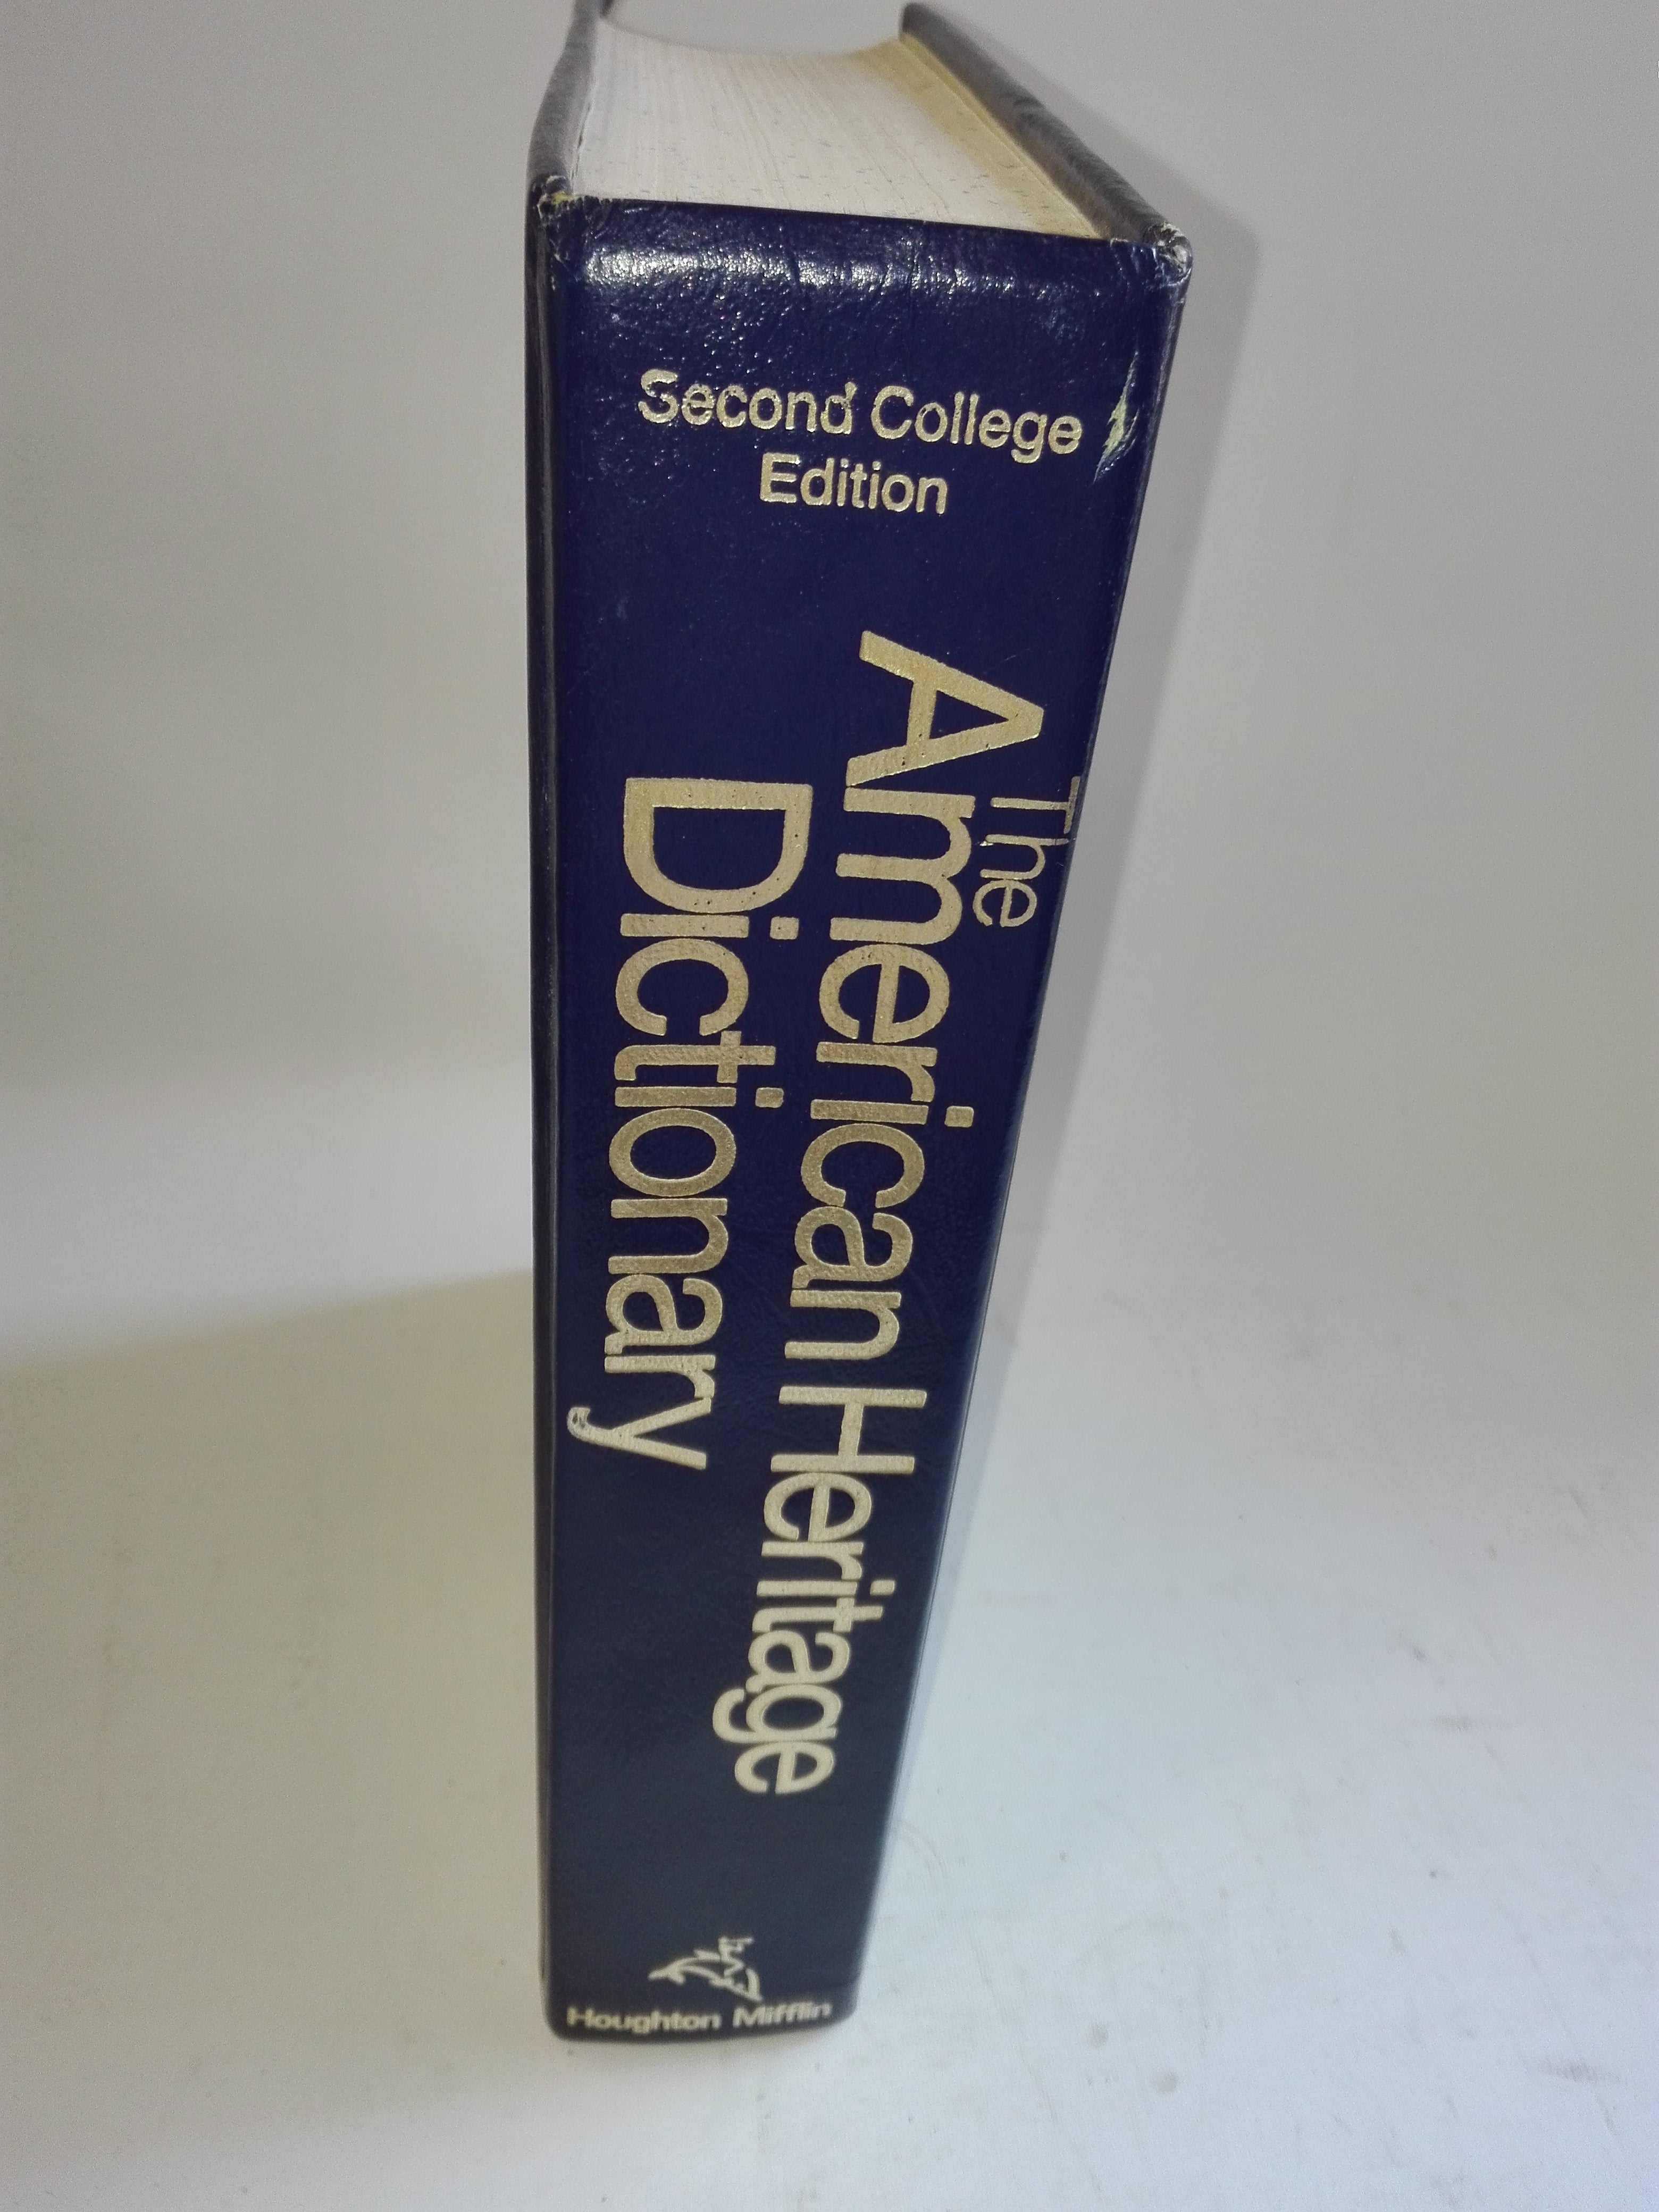 Second College Edition The American Heritage Dictionary Hardcover Book